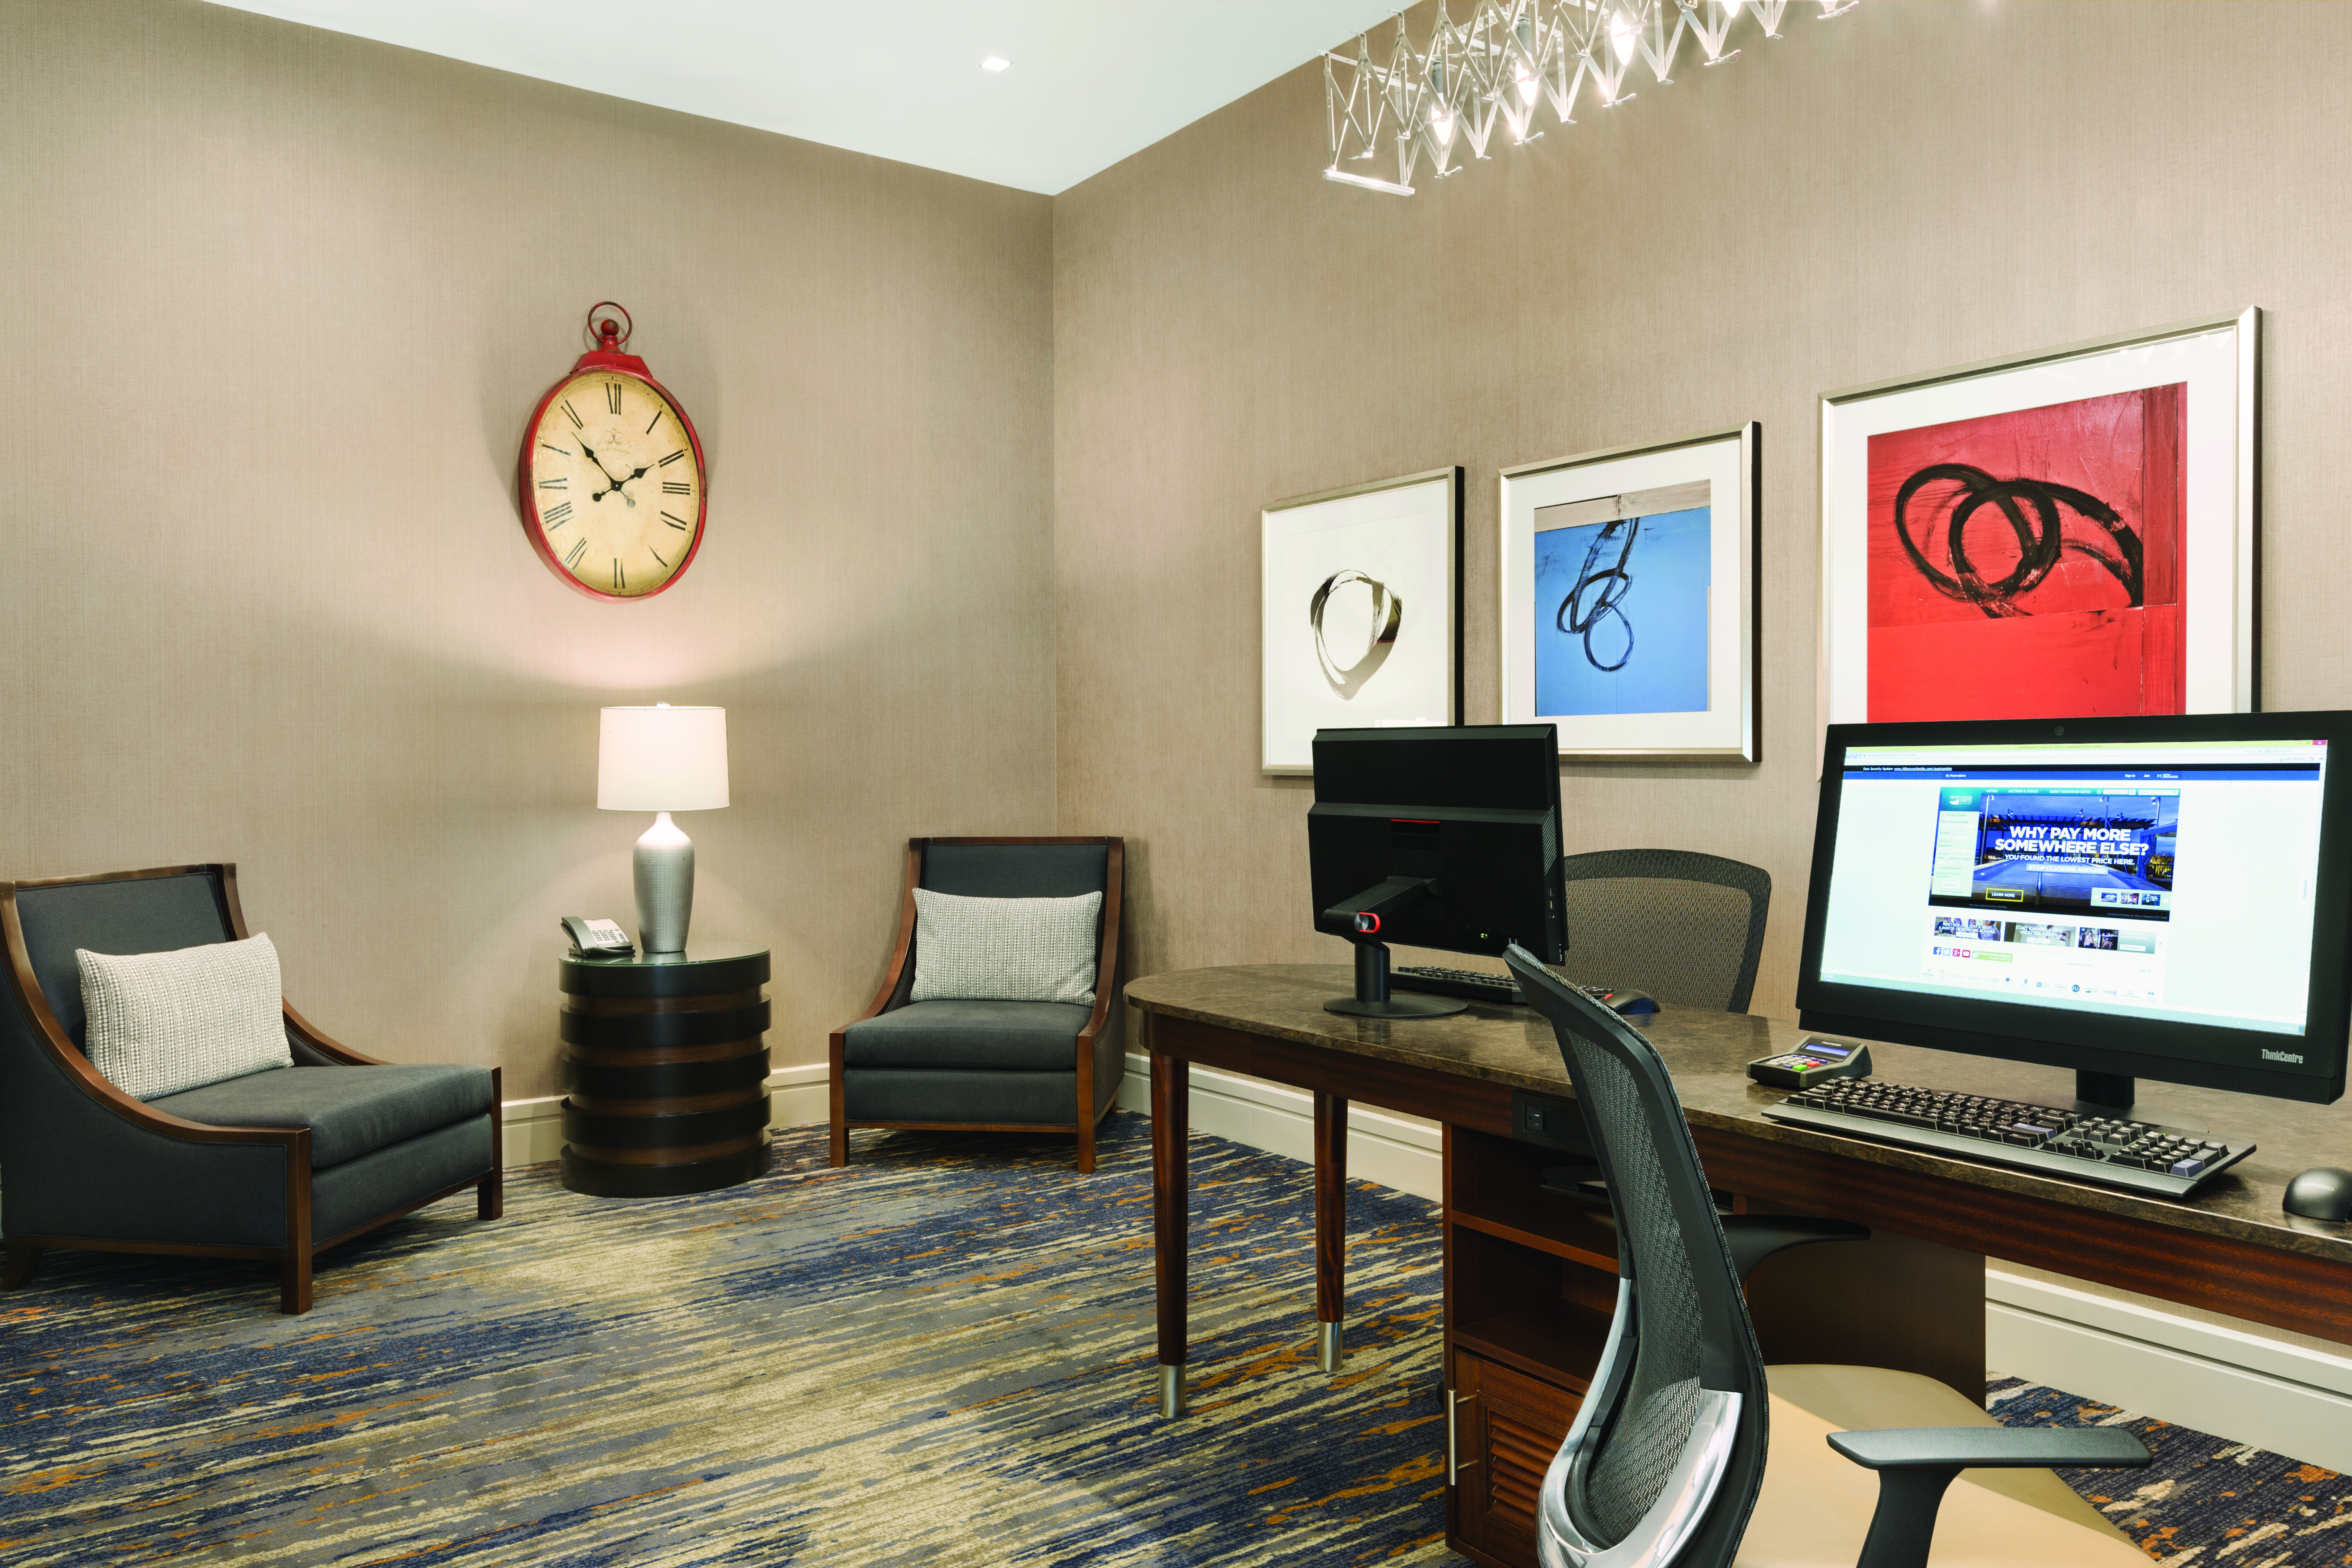 Business Center With Two Computer Workstations, Rolling Chairs, Wall Art, Table With Lamp and Two Arm ChairsComputers and Office Chairs in the Business Center